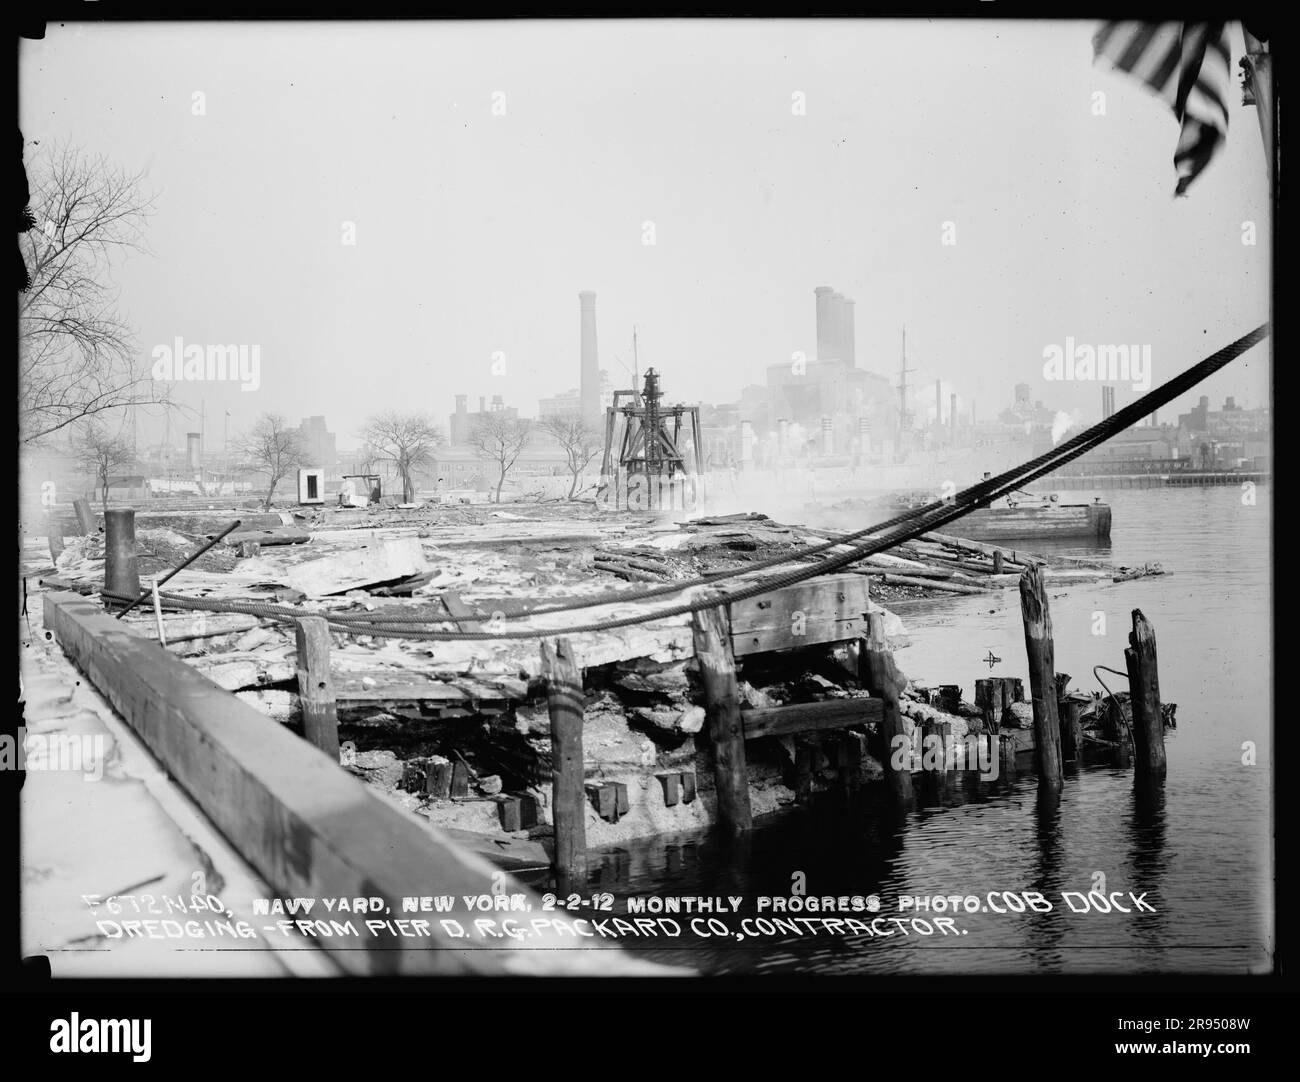 Monthly Progress Photo, Cob Dock Dredging, from Pier D, R. G. Packard Company, Contractor. Glass Plate Negatives of the Construction and Repair of Buildings, Facilities, and Vessels at the New York Navy Yard. Stock Photo